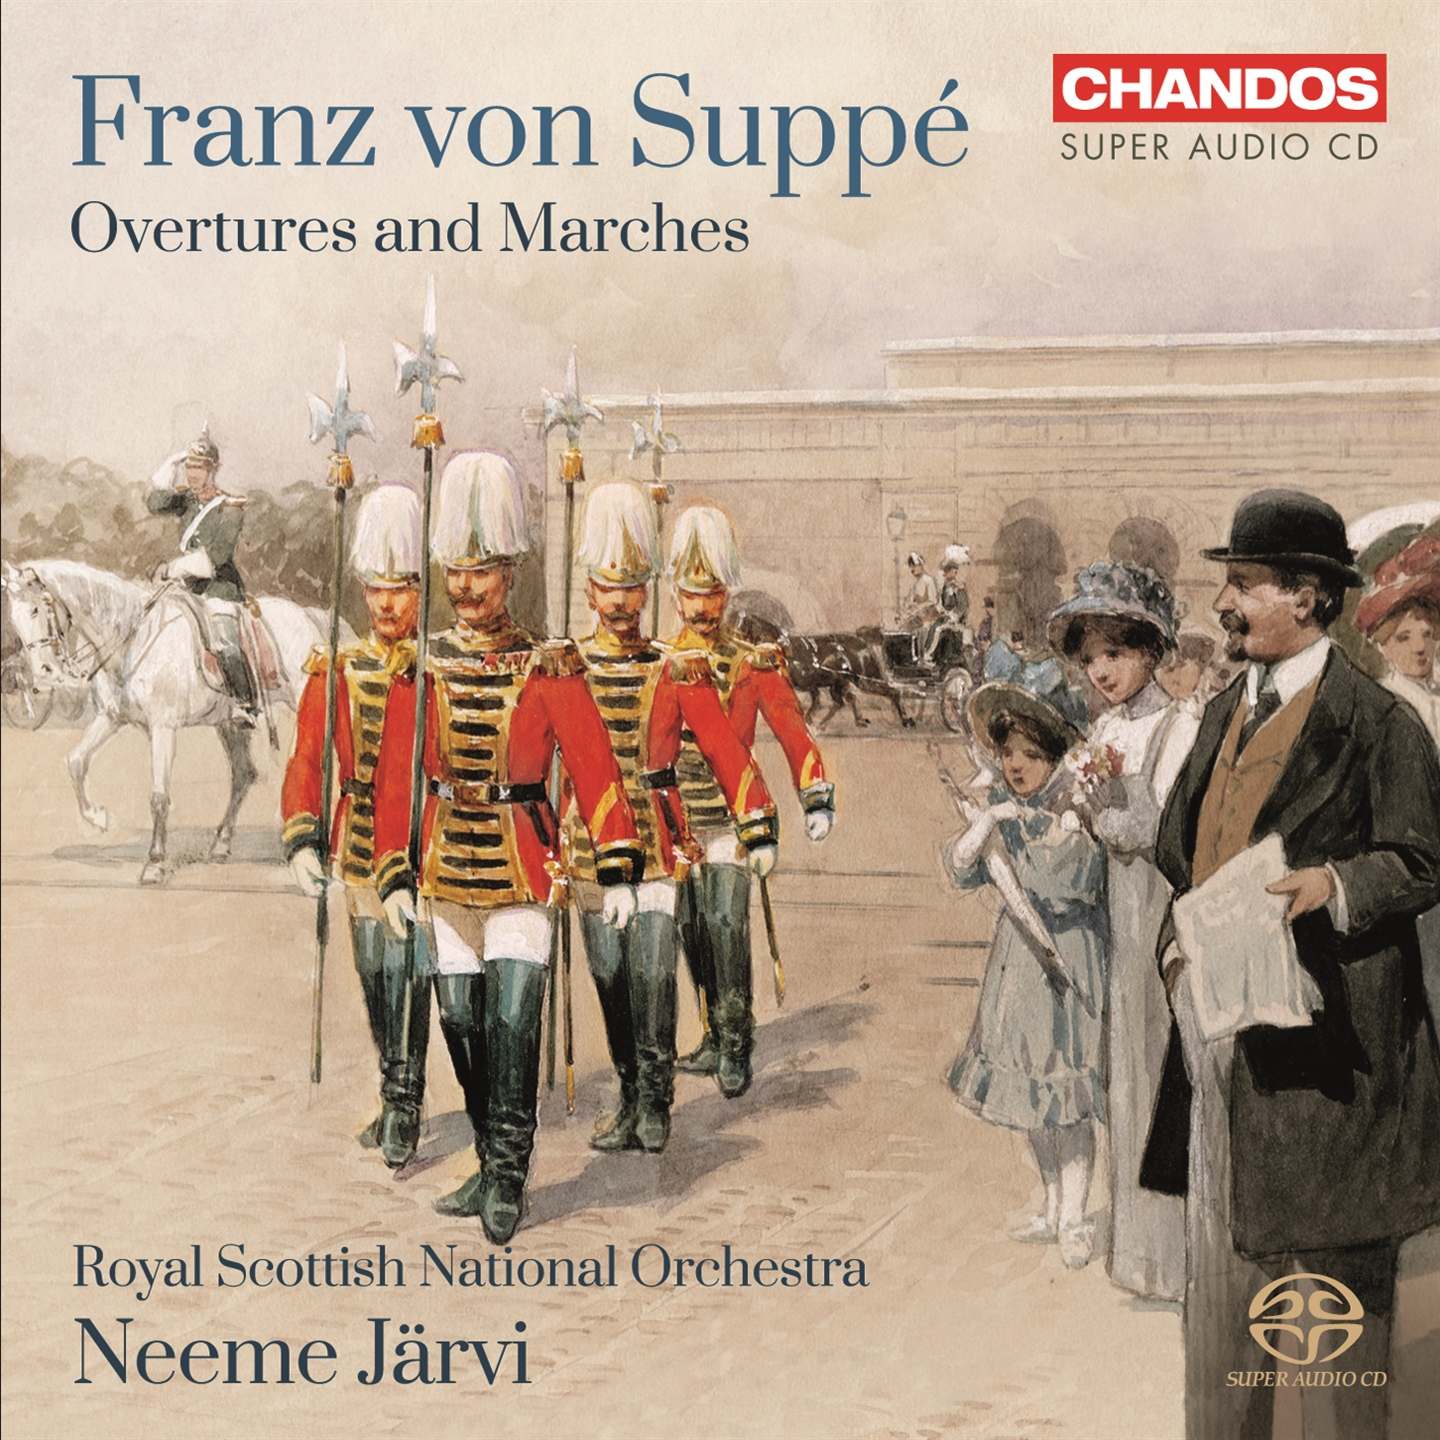 VON SUPPE: OVERTURES AND MARCHES